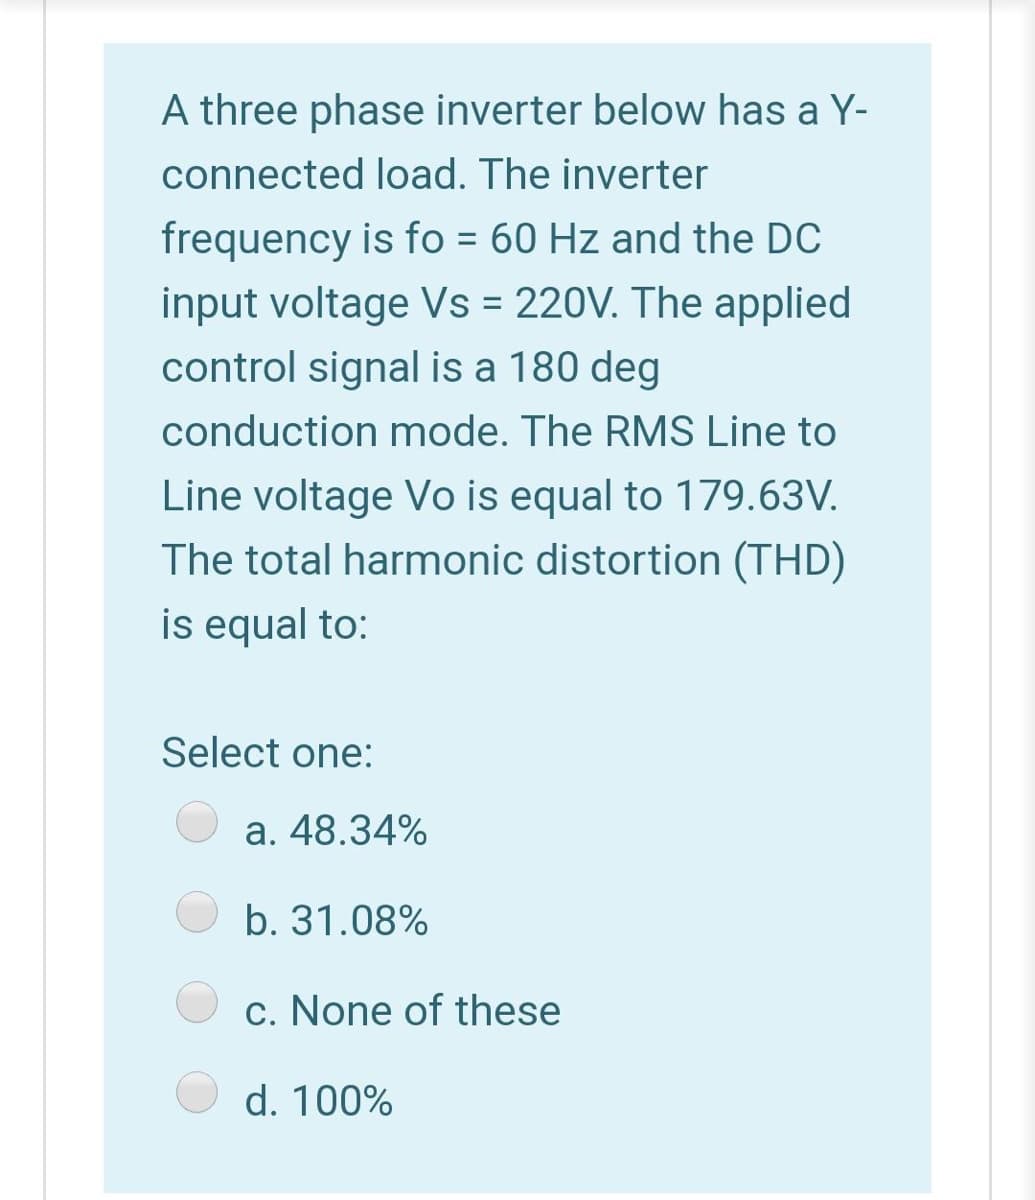 A three phase inverter below has a Y-
connected load. The inverter
frequency is fo = 60 Hz and the DC
input voltage Vs = 220V. The applied
control signal is a 180 deg
conduction mode. The RMS Line to
Line voltage Vo is equal to 179.63V.
The total harmonic distortion (THD)
is equal to:
Select one:
a. 48.34%
b. 31.08%
c. None of these
d. 100%